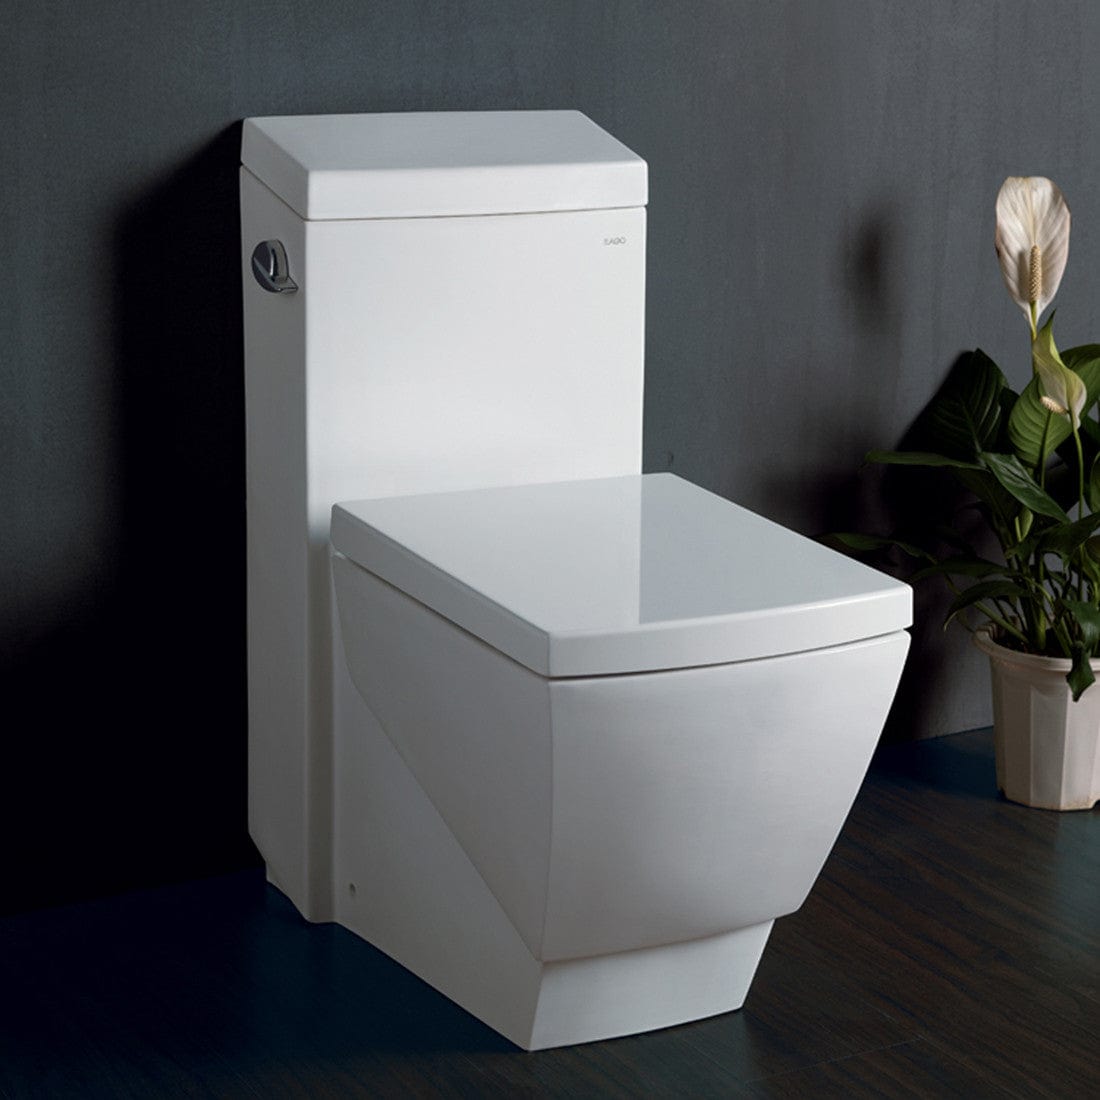 The Ariel Platinum TB336M Contemporary European Toilet is unlike any other. This one-piece design features clean edges and is a very modern version of the home toilet. The exhaust pipe is fully glazed, trap distance is 12 in. and the flush uses low water consuming out and out flushing technology.